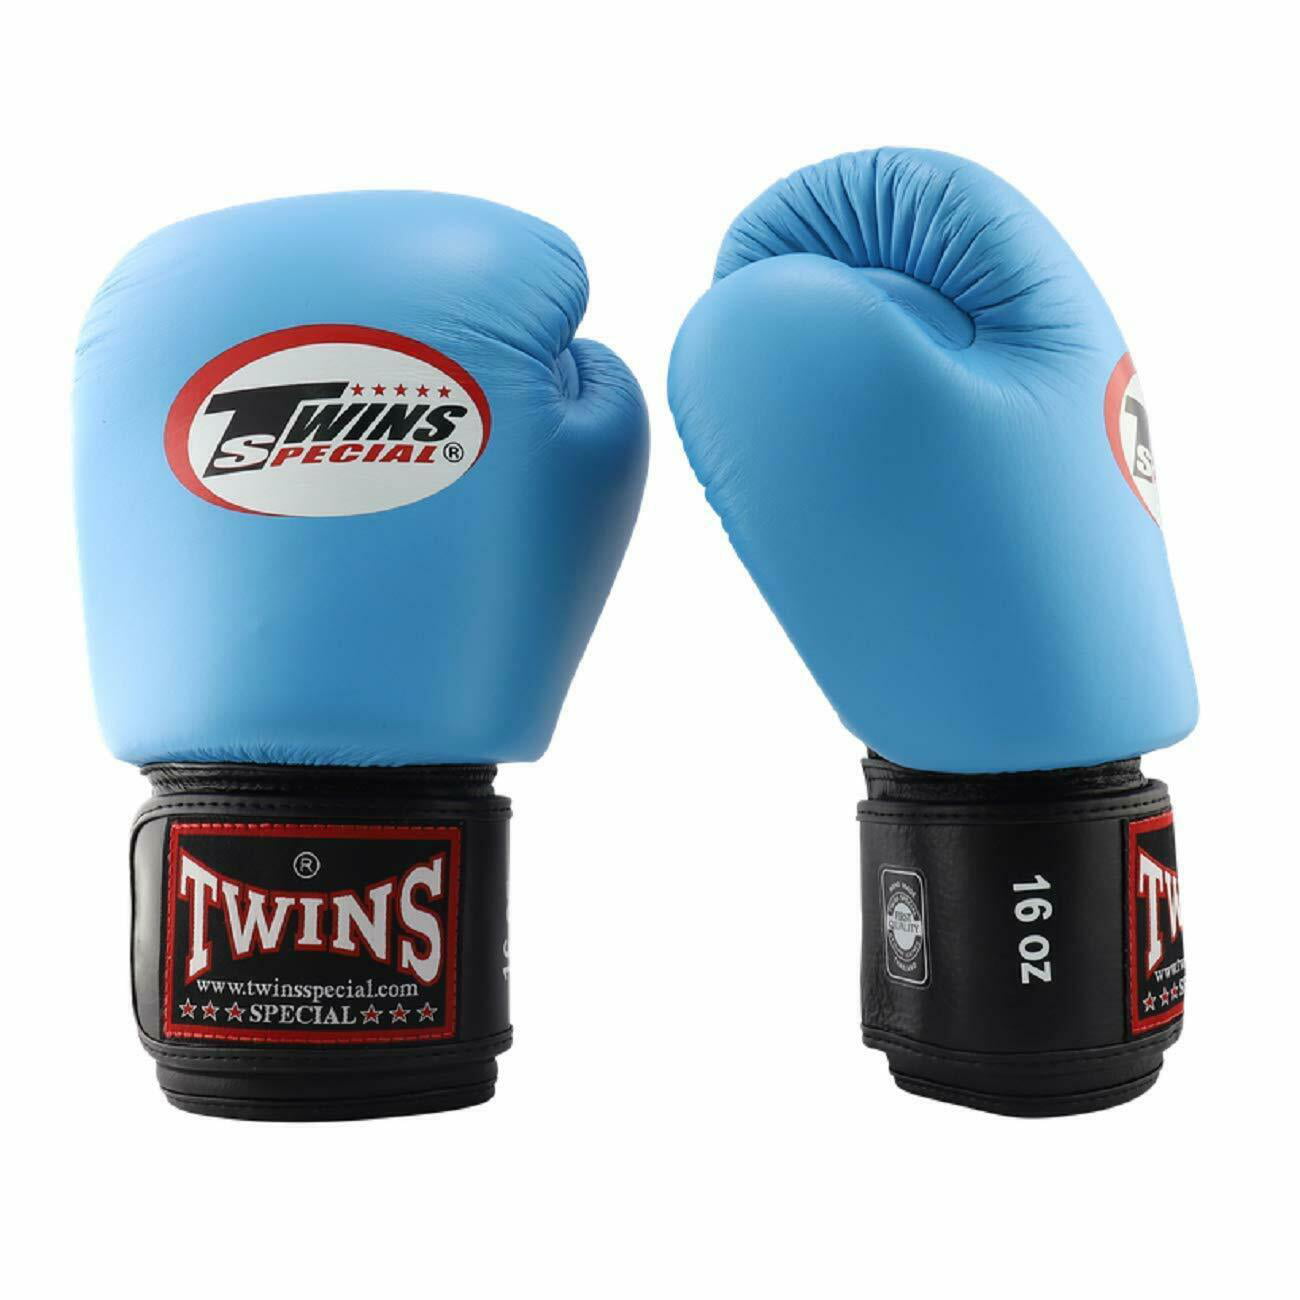 Details about   Twins Deluxe Boxing Gloves Muay Thai Sparring Gloves Kickboxing Training Gloves 